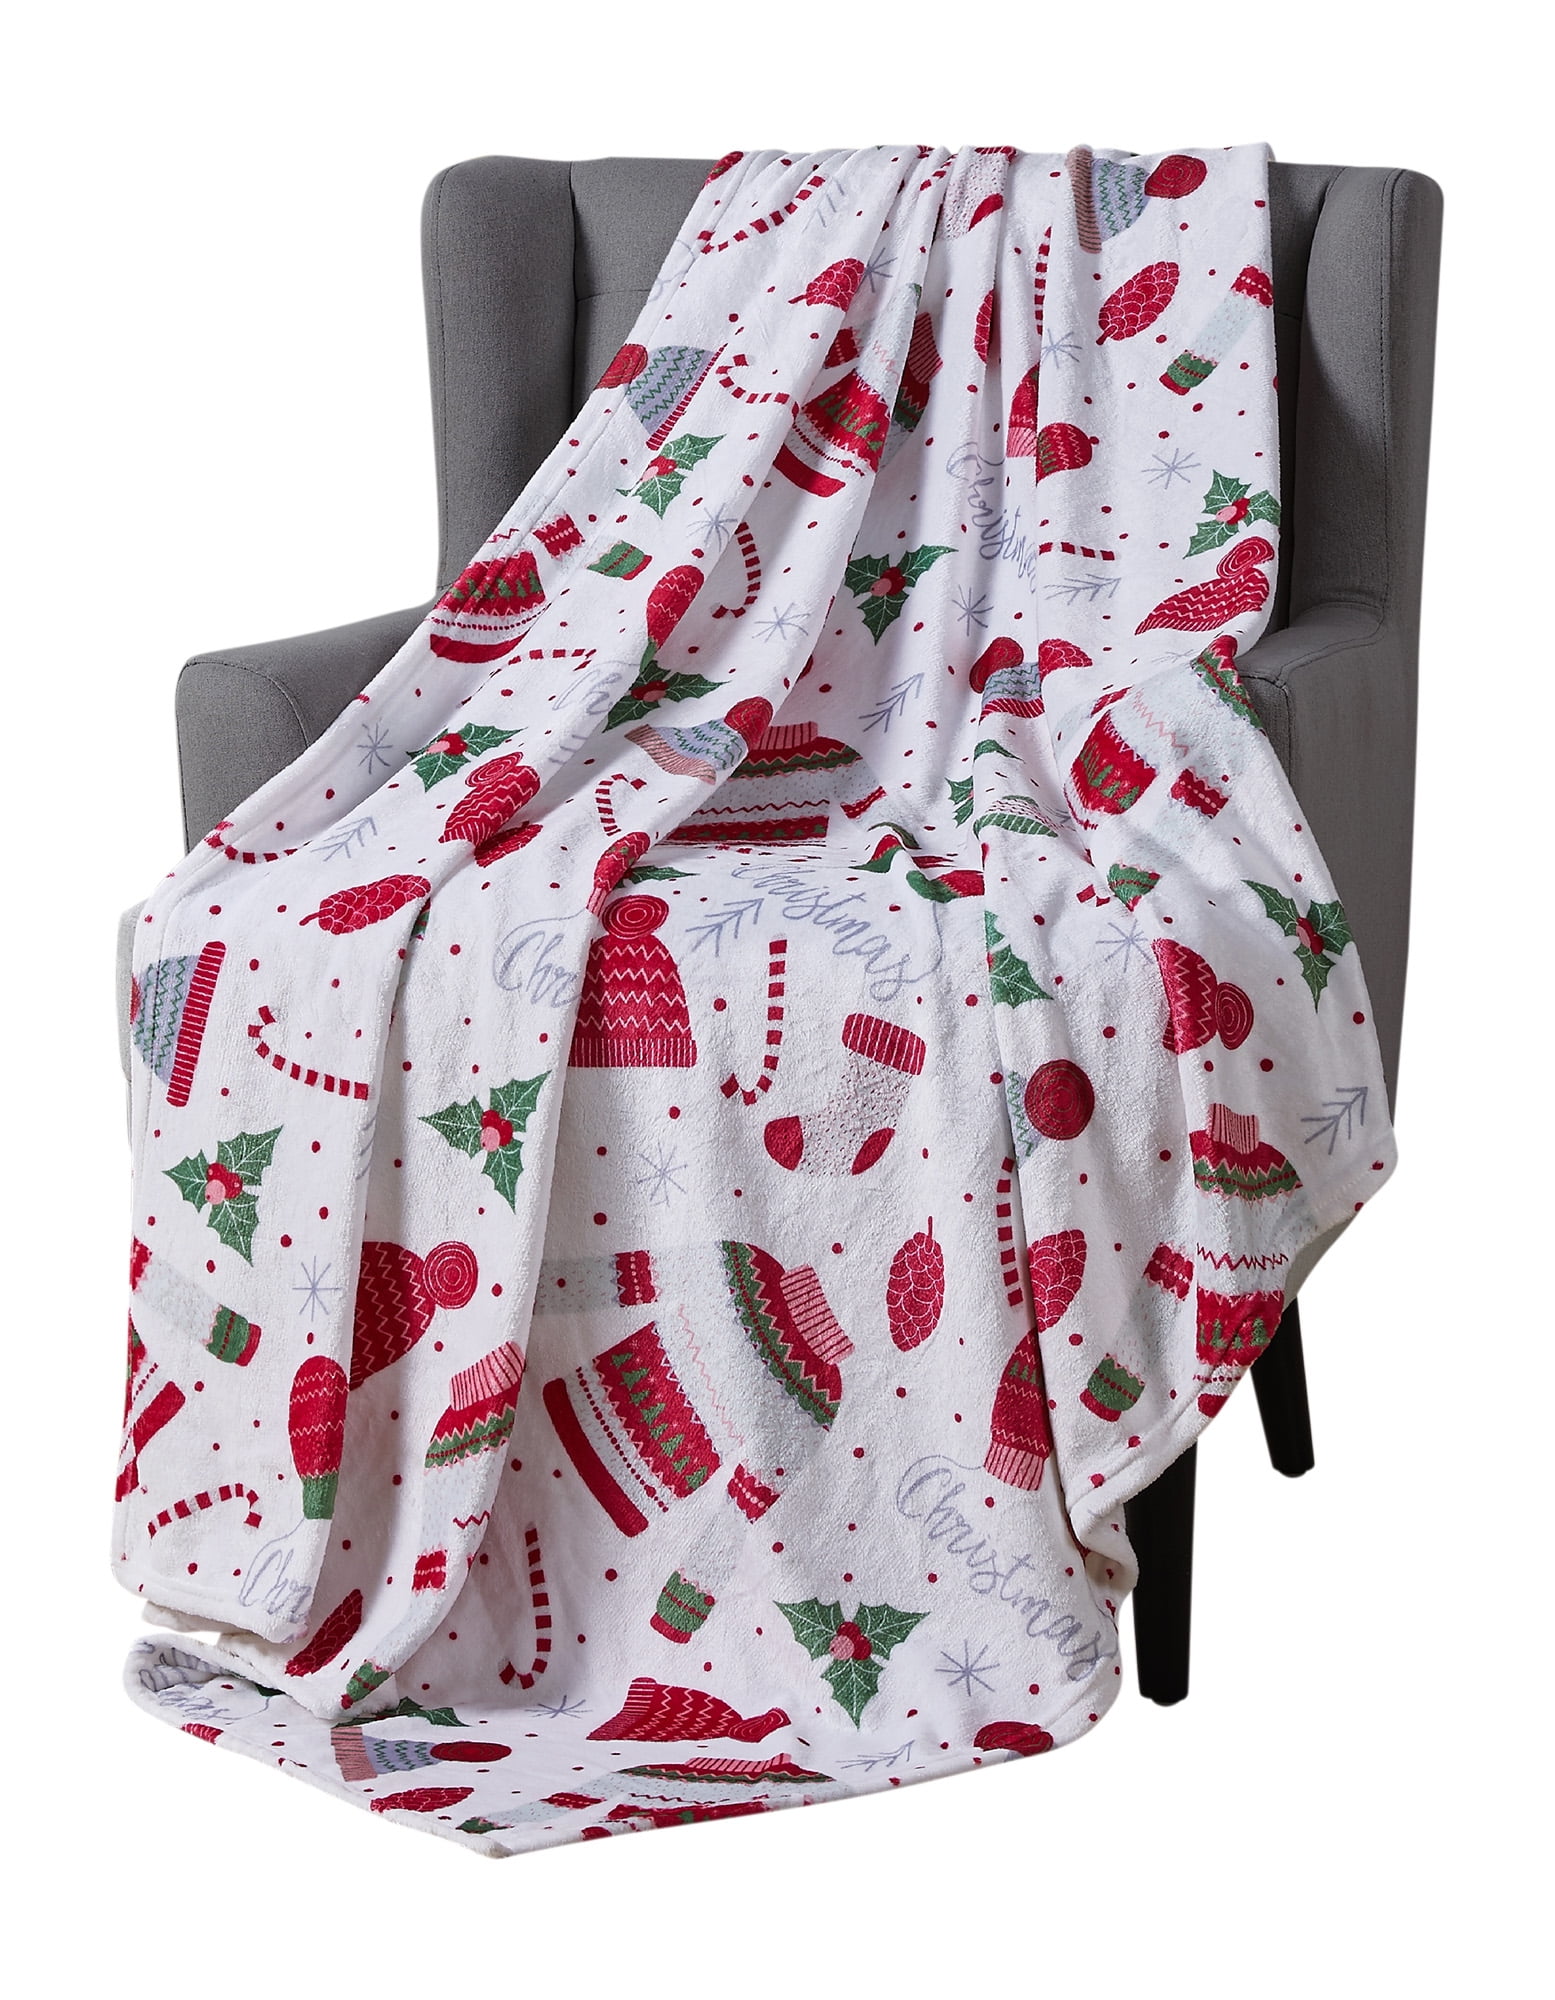 Christmas Plush Throw Blanket With Warm And Cozy Design